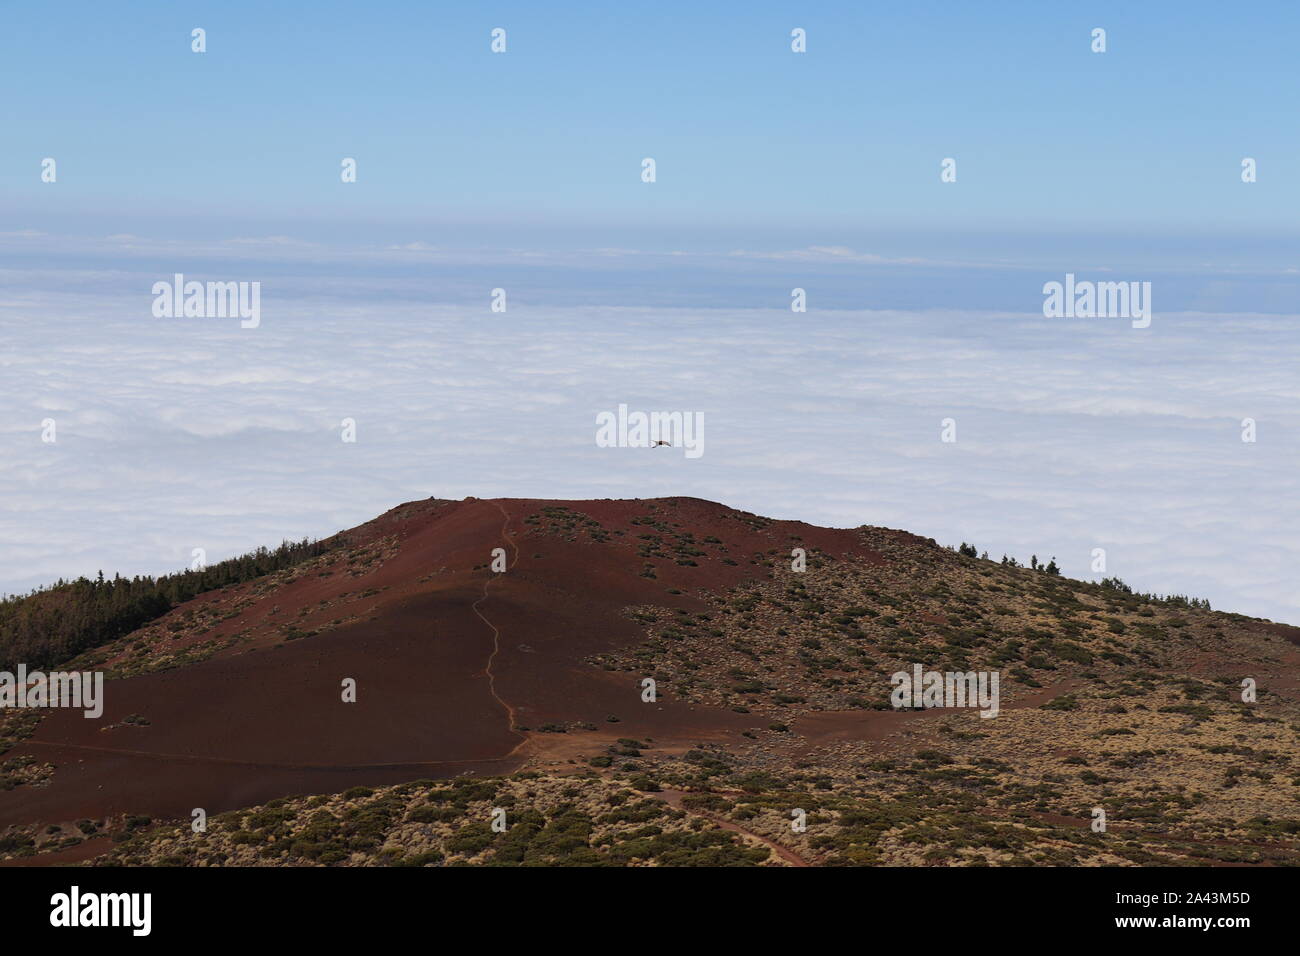 Nature. Mountains. Backpacking. Freedom. Clouds. Tenerife. Volcano. Above the clouds. Sky line. Stock Photo